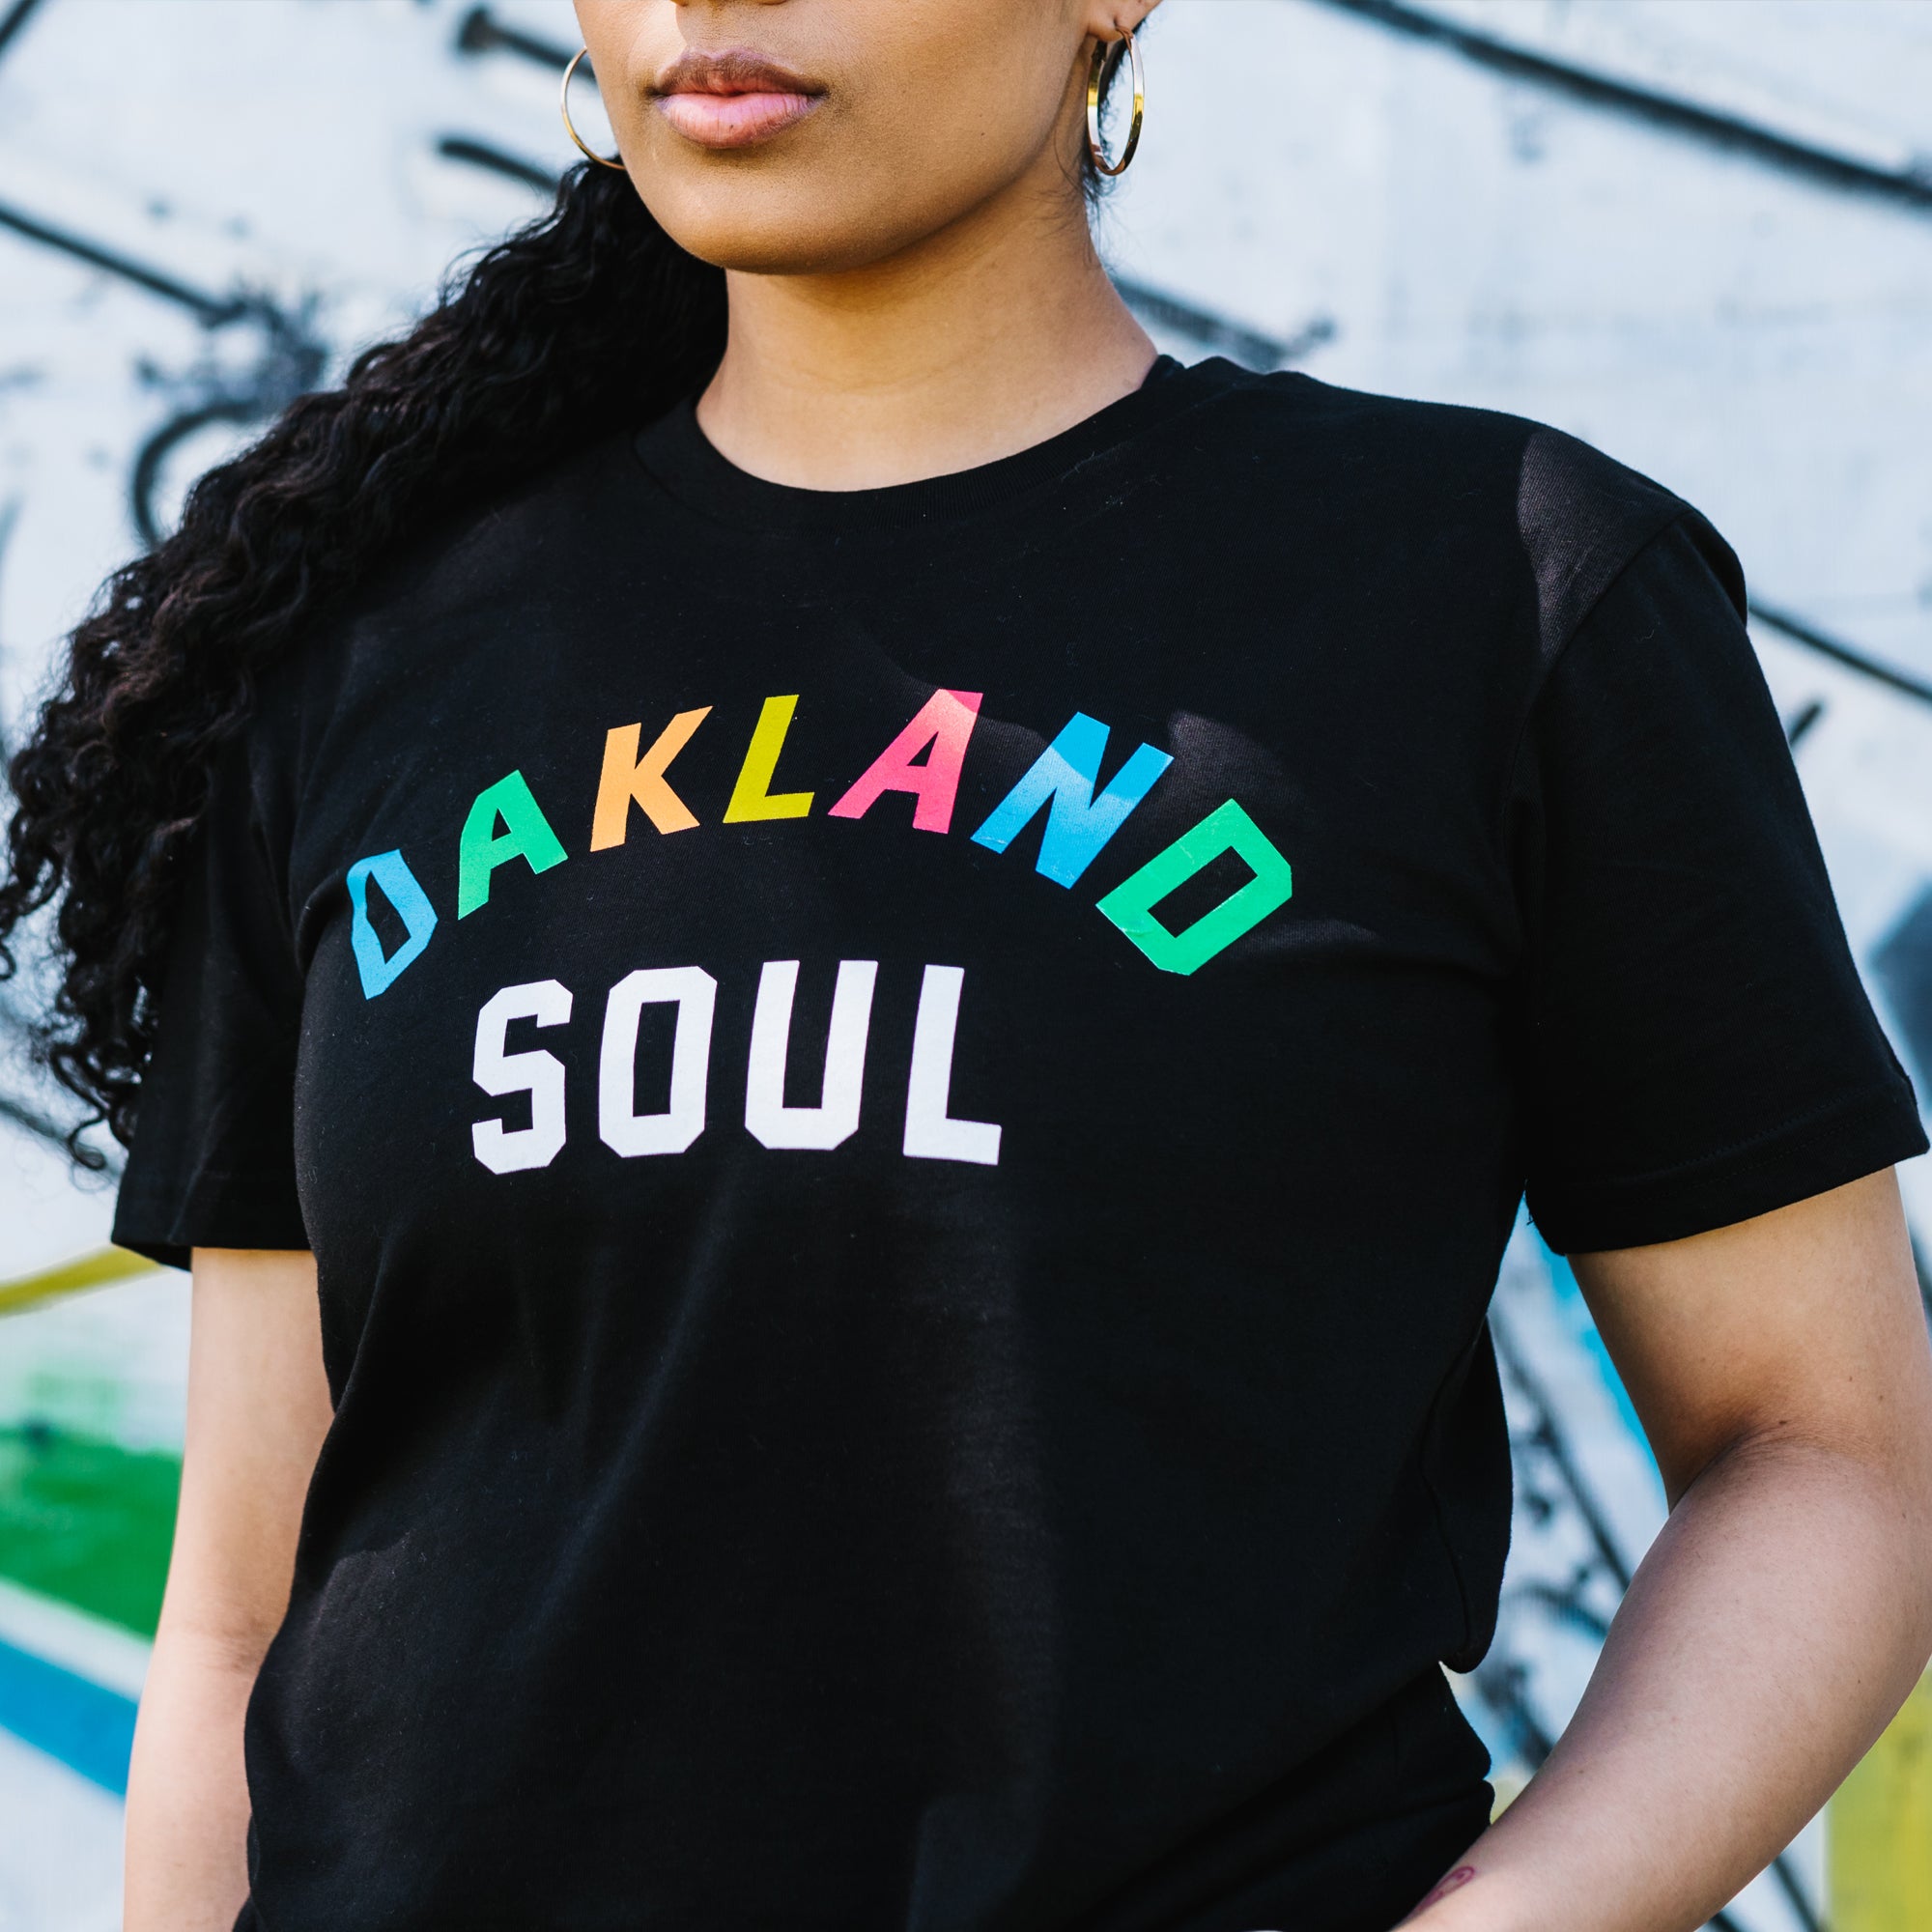 Close up of woman from waist to chin, wearing black t-shirt with full color Oakland Soul wordmark logo. Blurred graffiti background.